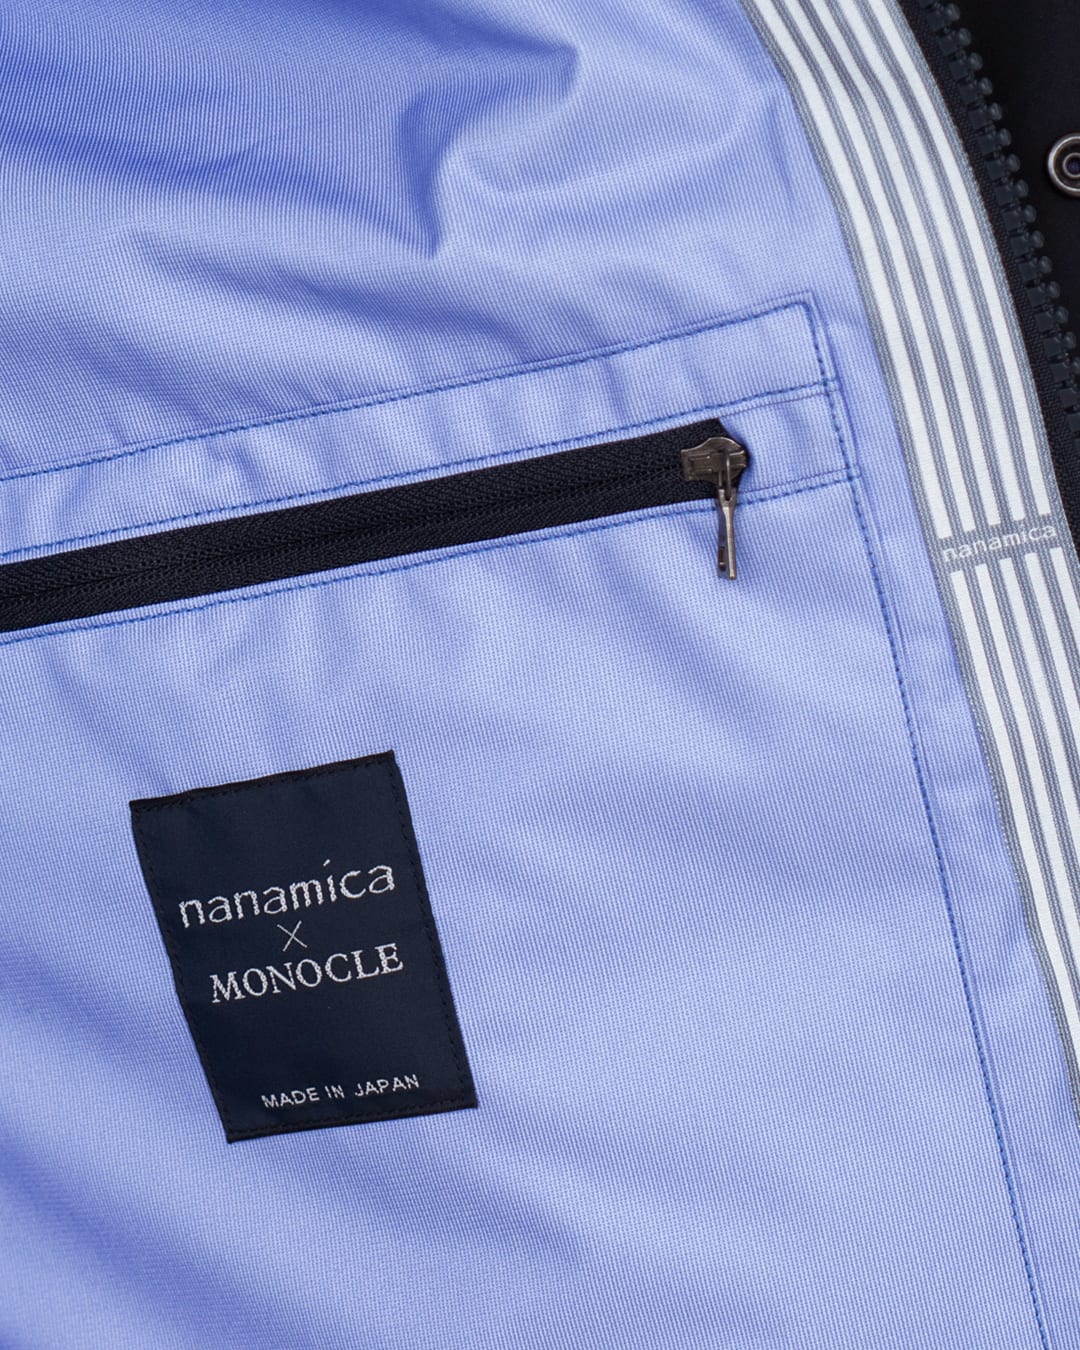 nanamica and Monocle Link for Limited Edition GORE-TEX Jacket